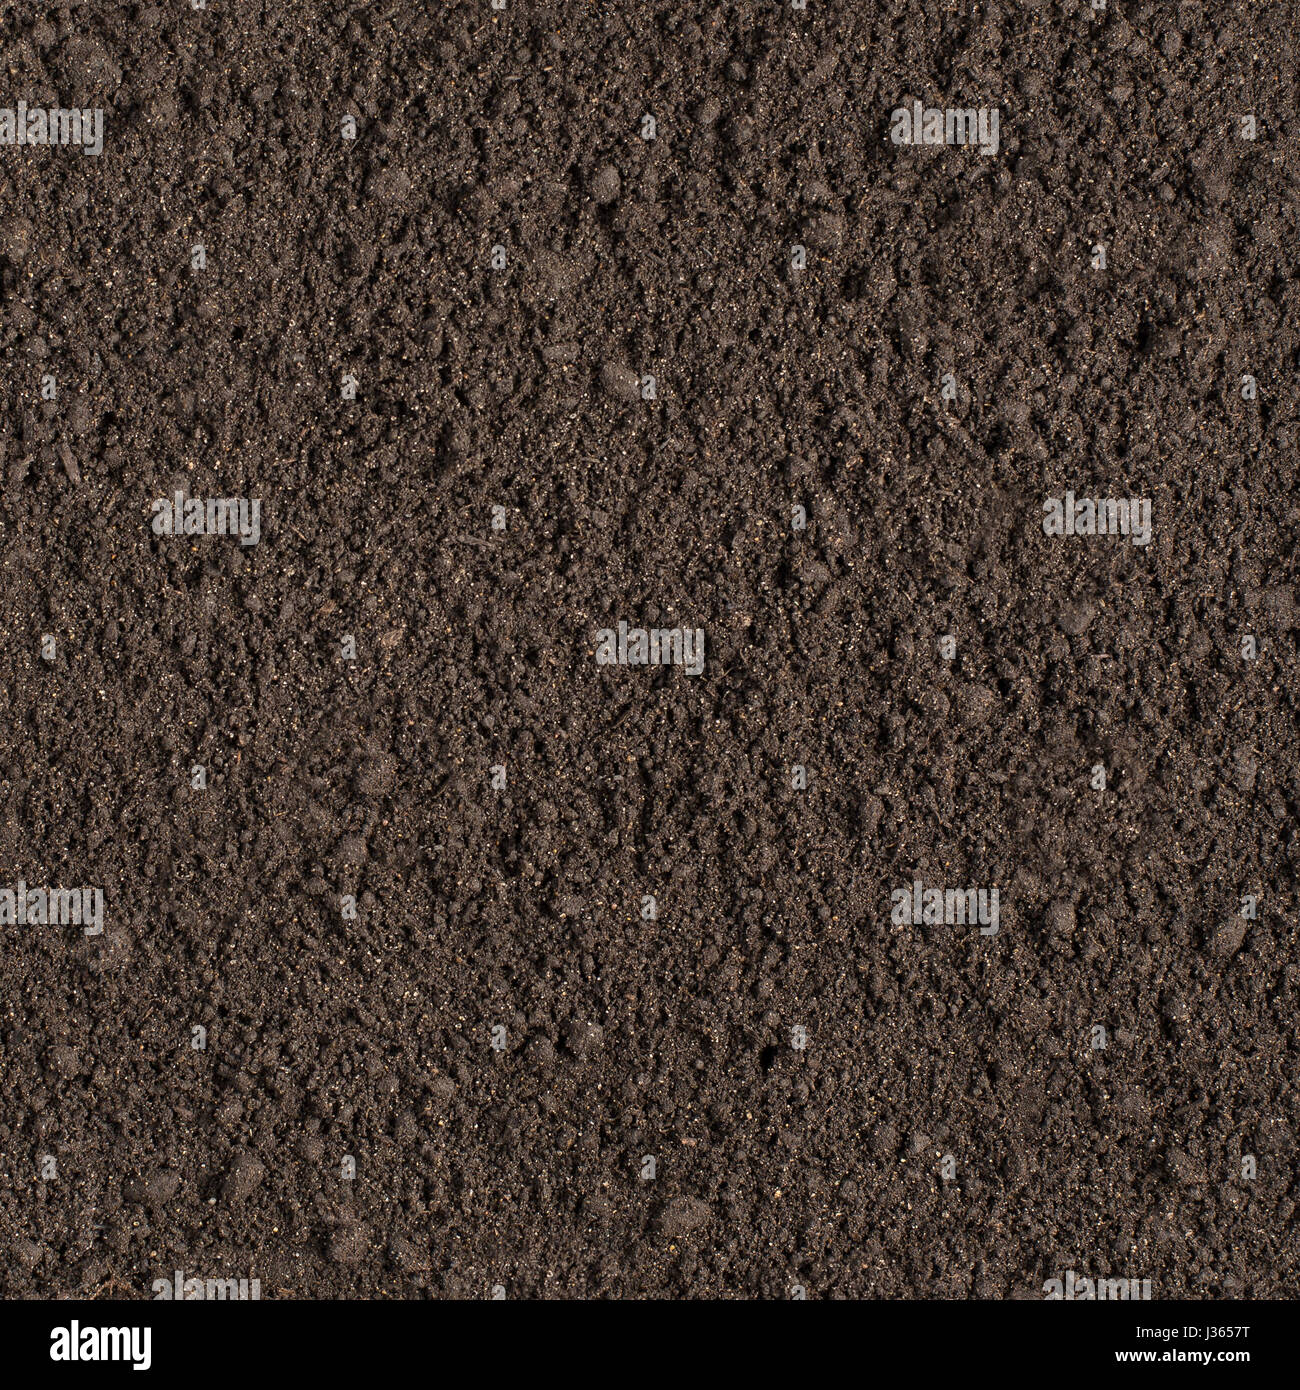 Seamless soil texture. Can be used as pattern to fill background. Stock Photo